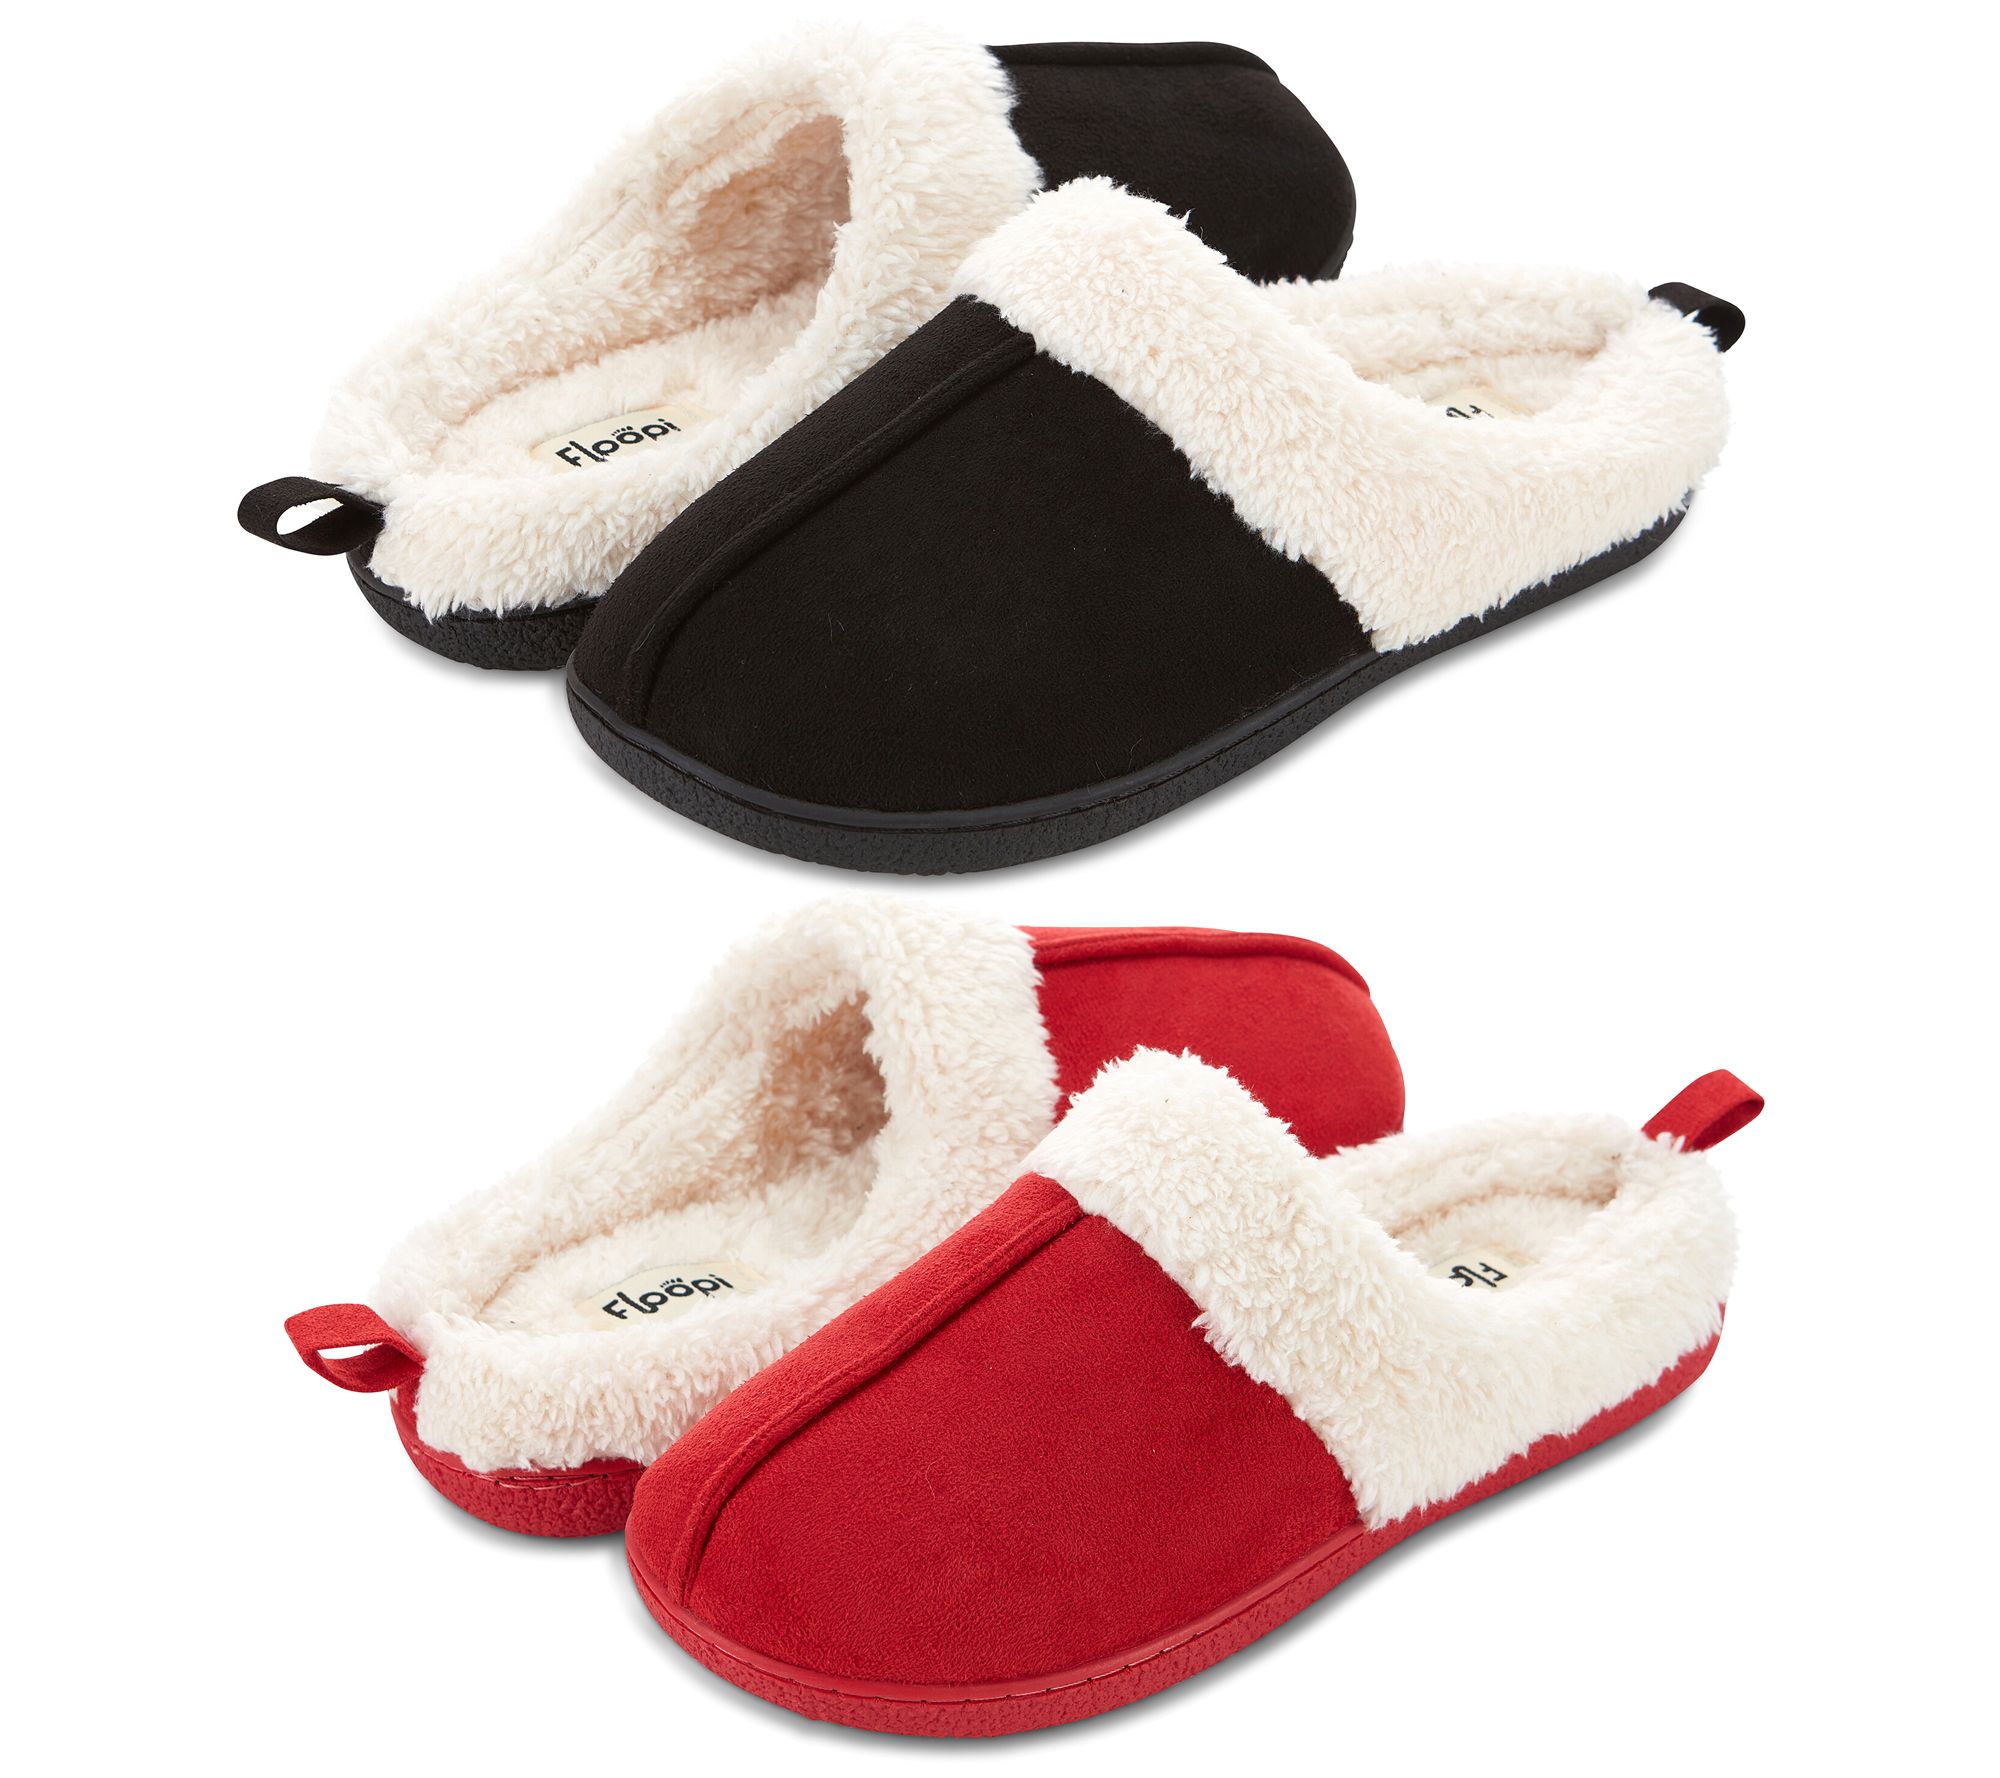 Floopi Women's Faux Suede Clog Slippers - 2 Pack - QVC.com